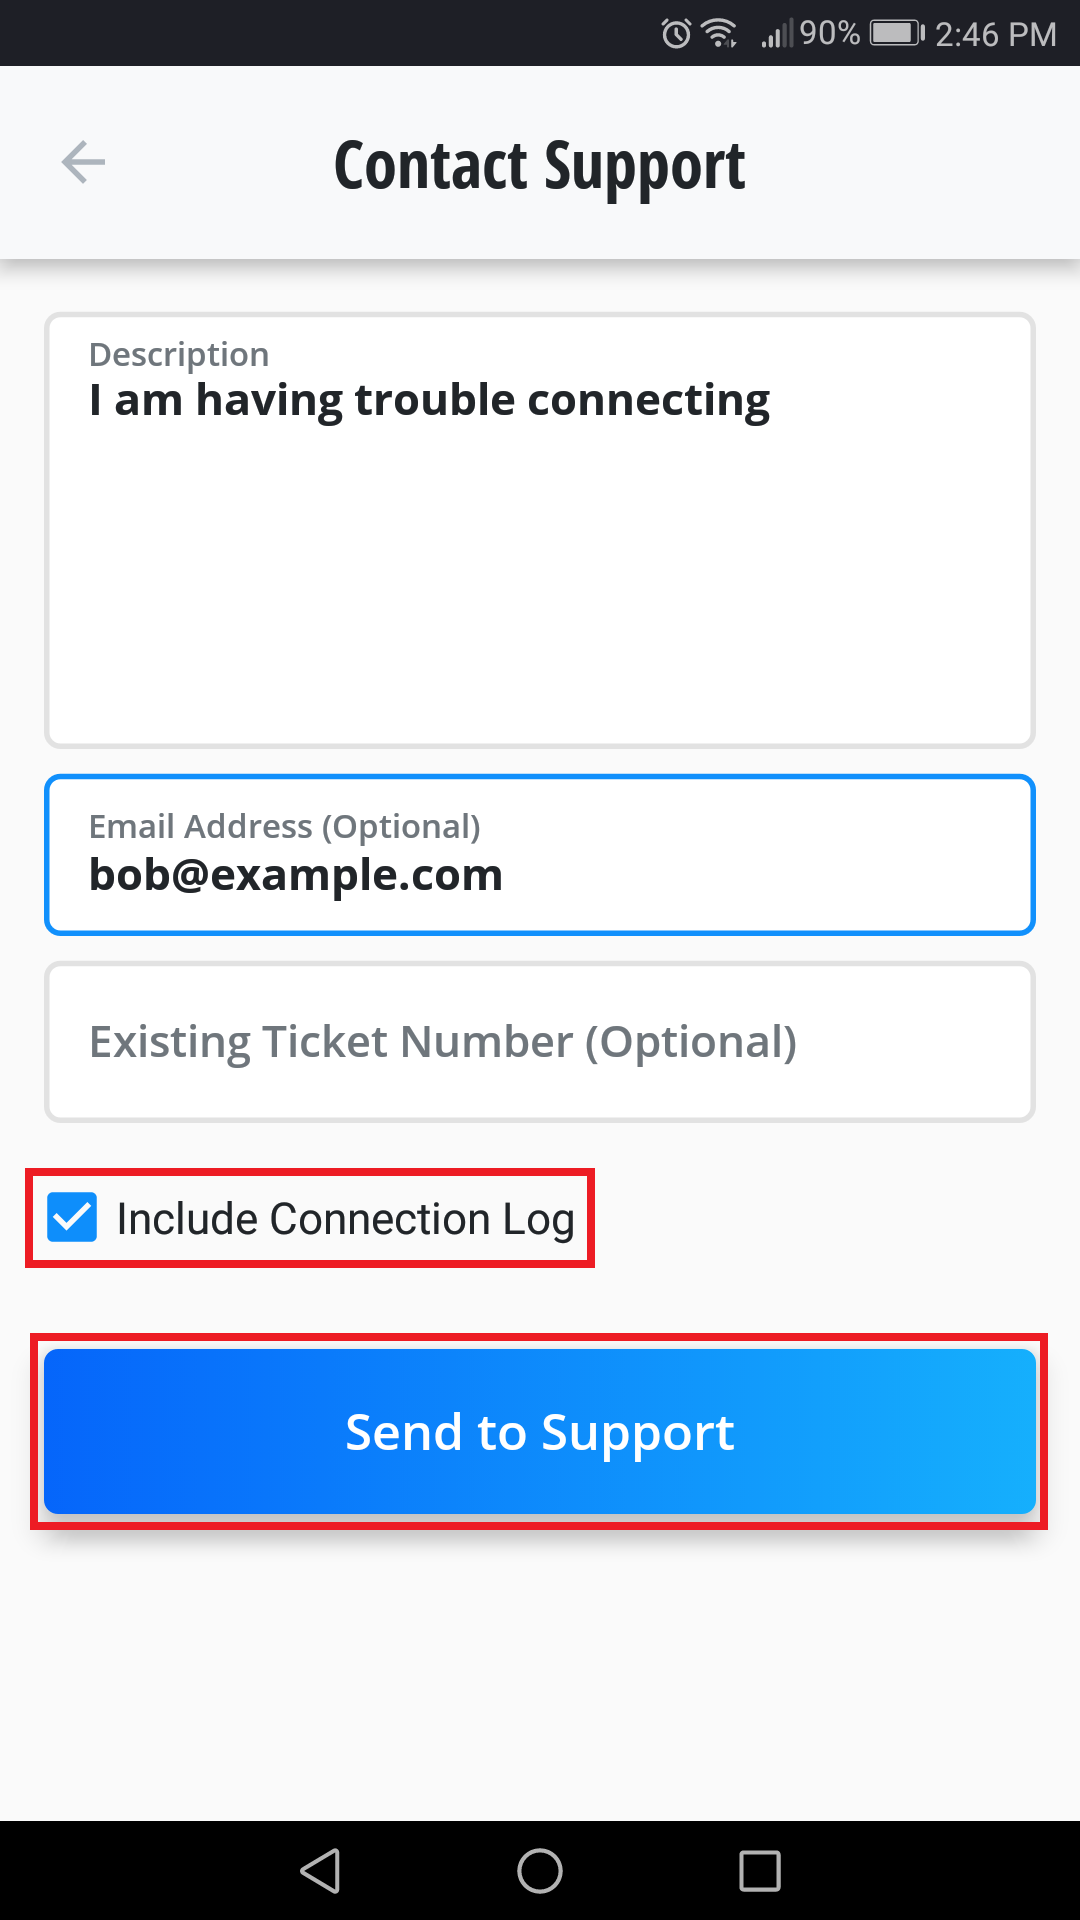 Vypr_App_-_Contact_Support_Screen_-_Include_Connection_Log_and_Send_to_Support_Selected.png